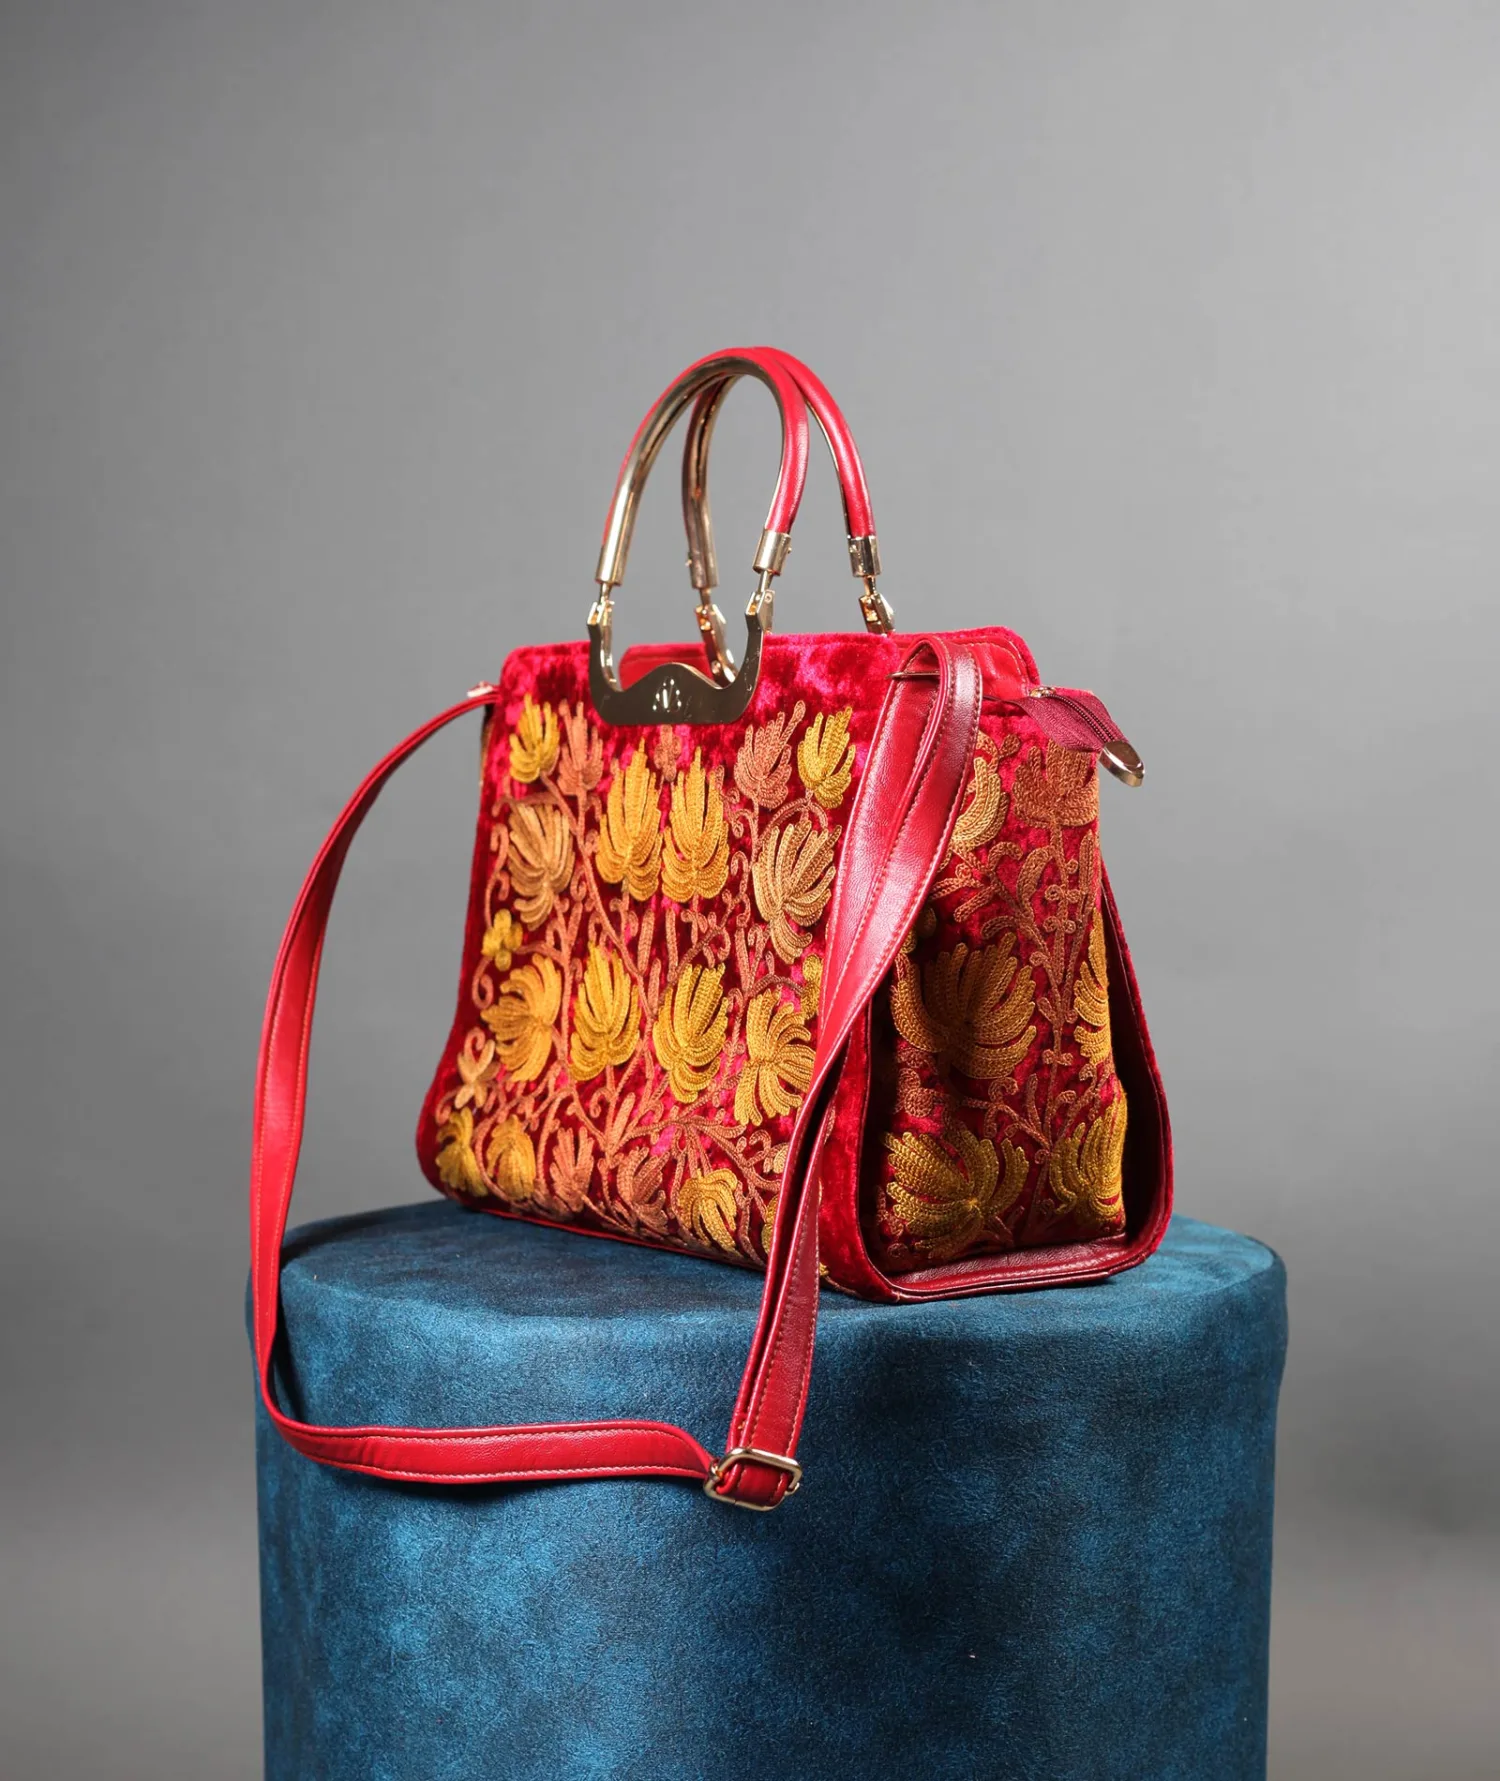 Chinar Design Aari Embroidered Red Hand Bag